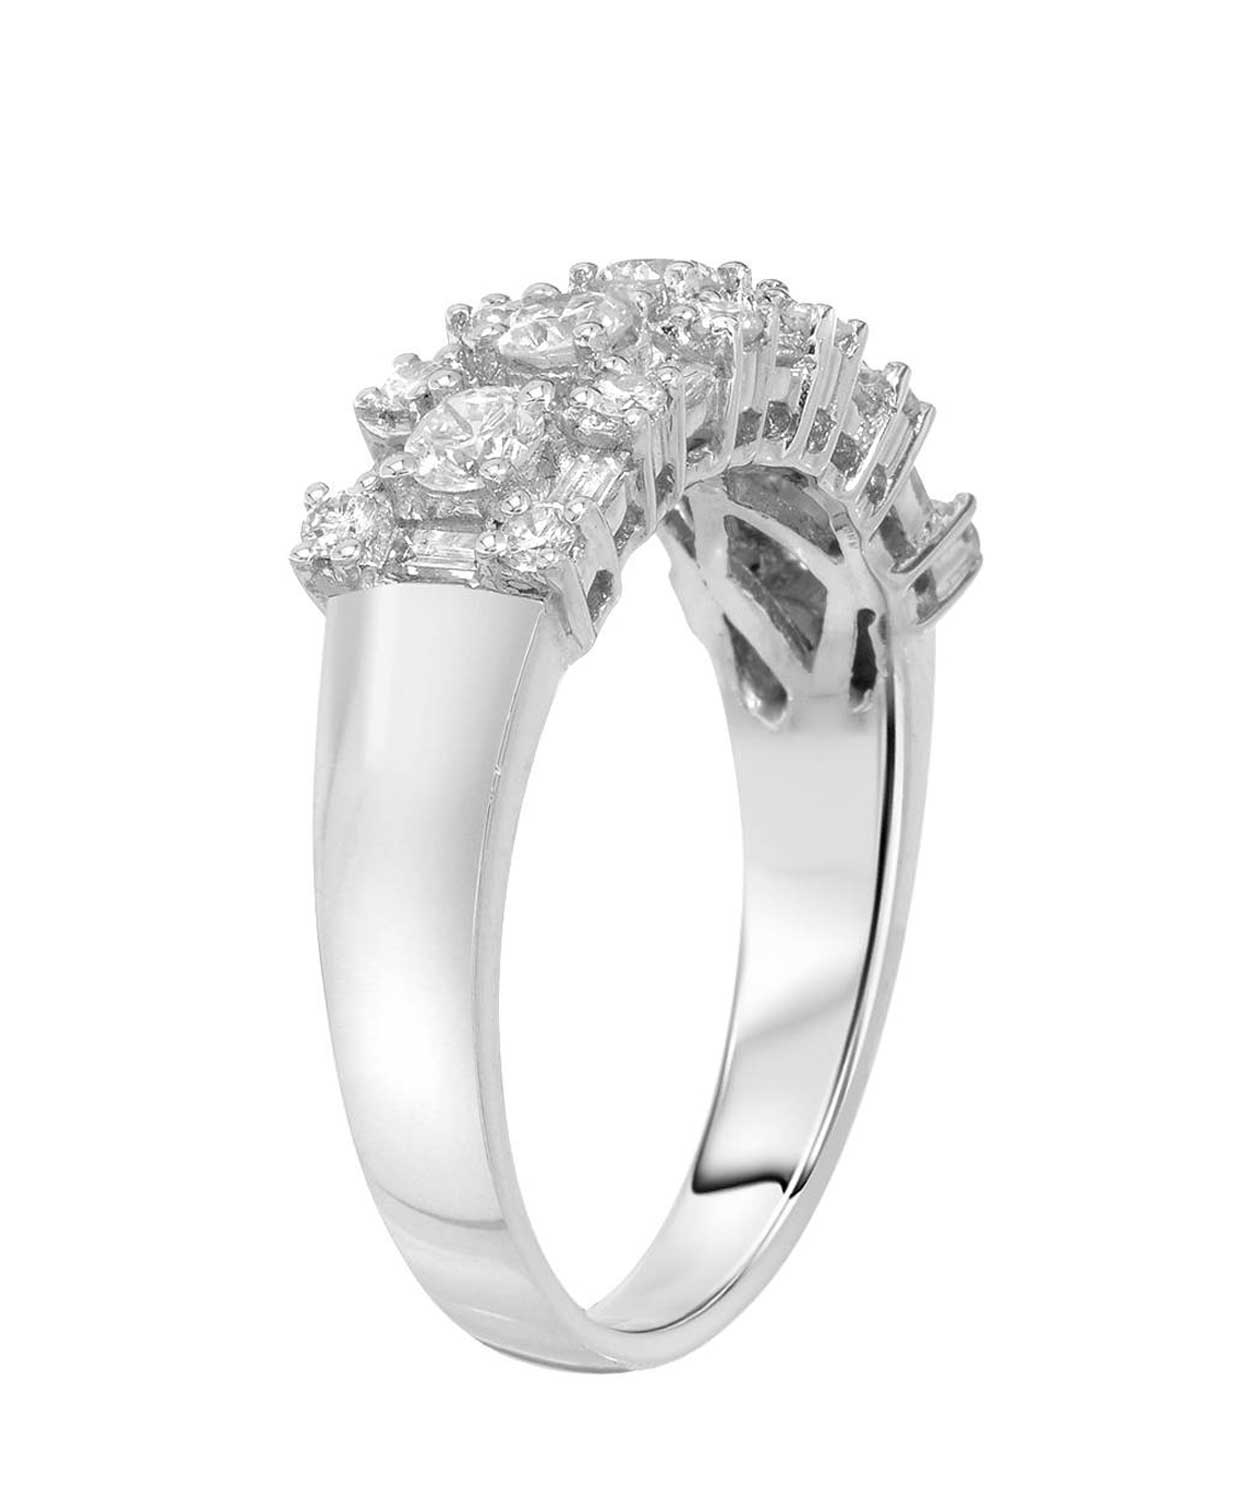 Signature Collection 1.20 ctw Diamond 18k White Gold Elegant Right Hand Ring View 2